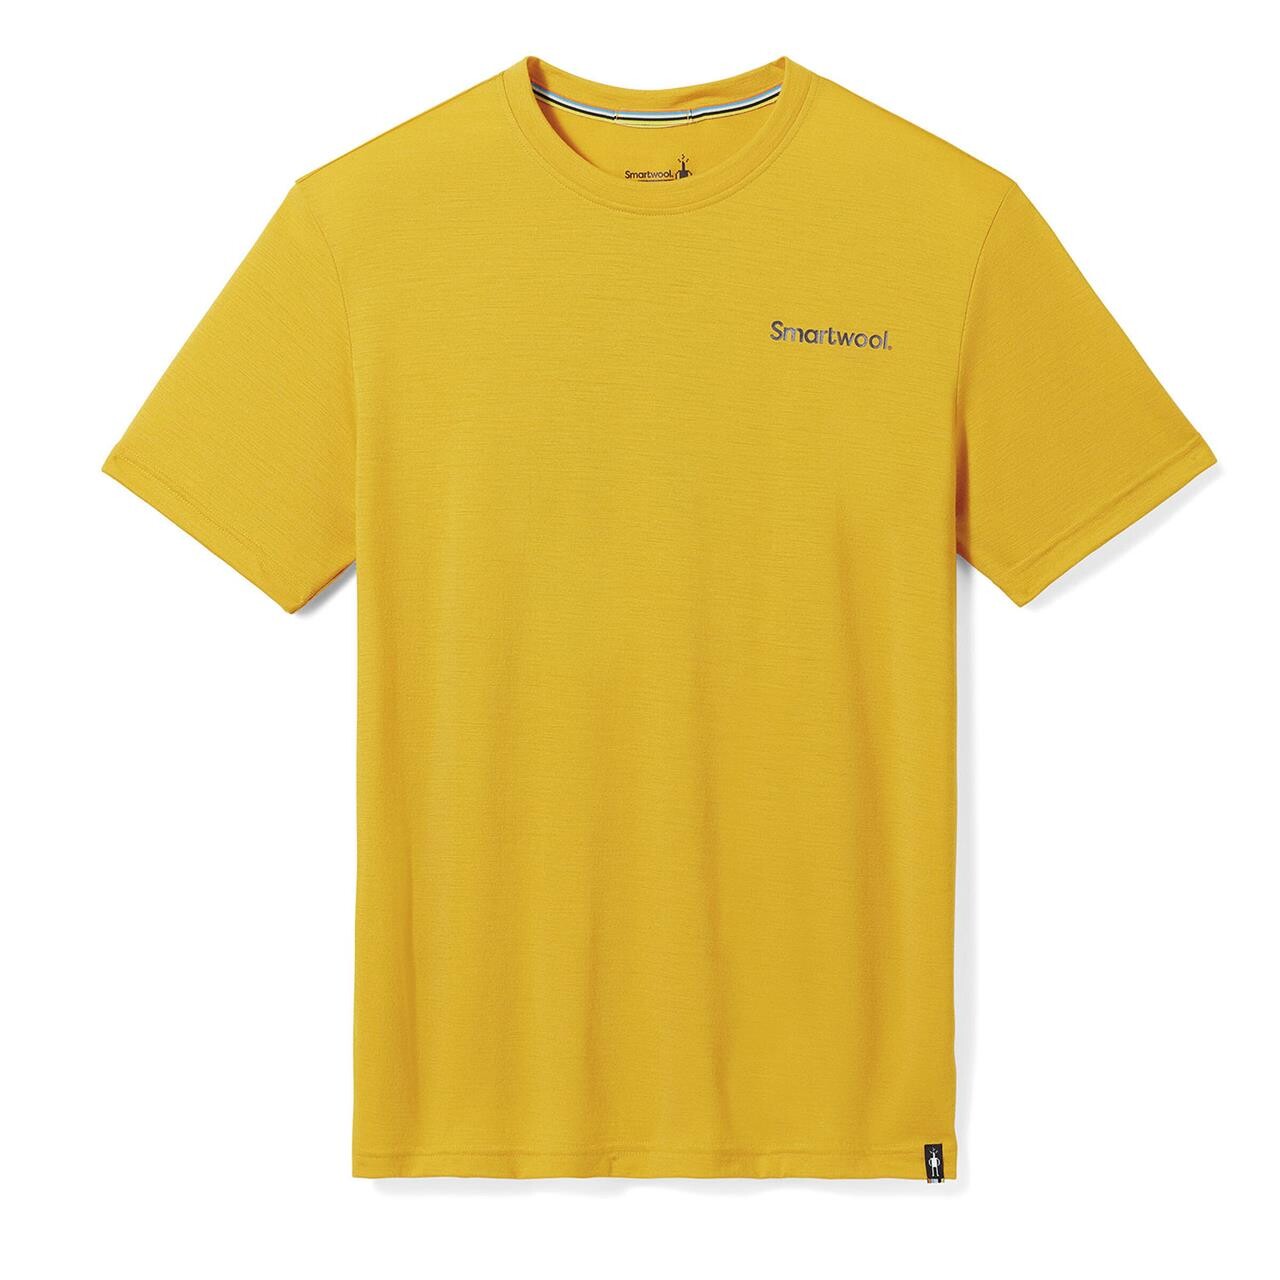 Billede af Smartwool Dawn Rise Graphic S/S Tee Slim Fit (Gul (HONEY GOLD) Small)